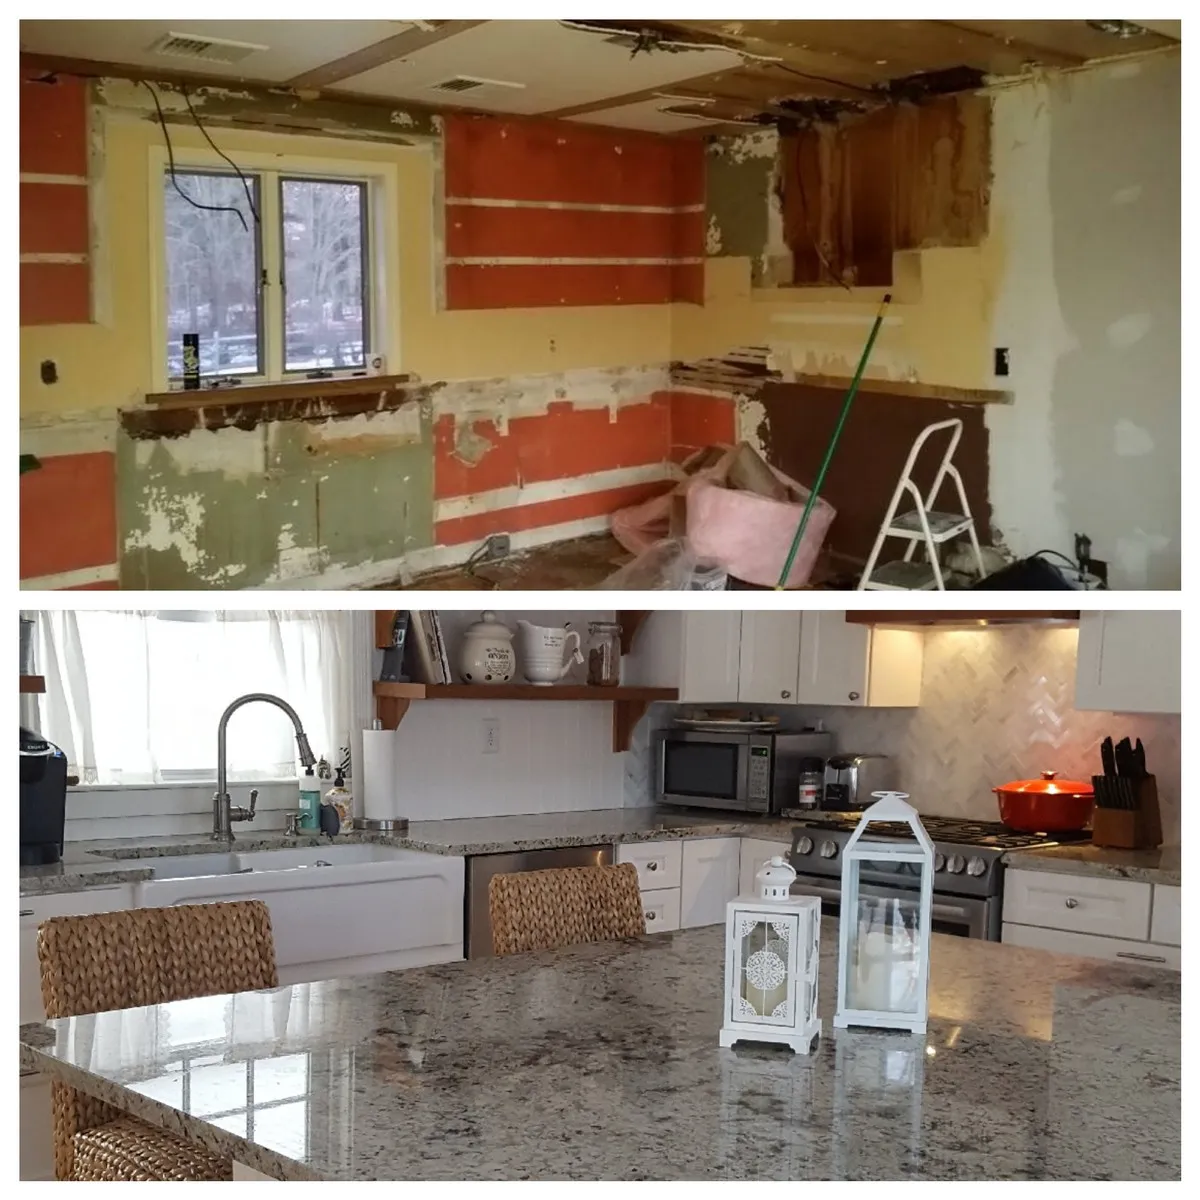 Before and after images of a full-scale kitchen remodel that included backsplash installation completed by Mr. Handyman.